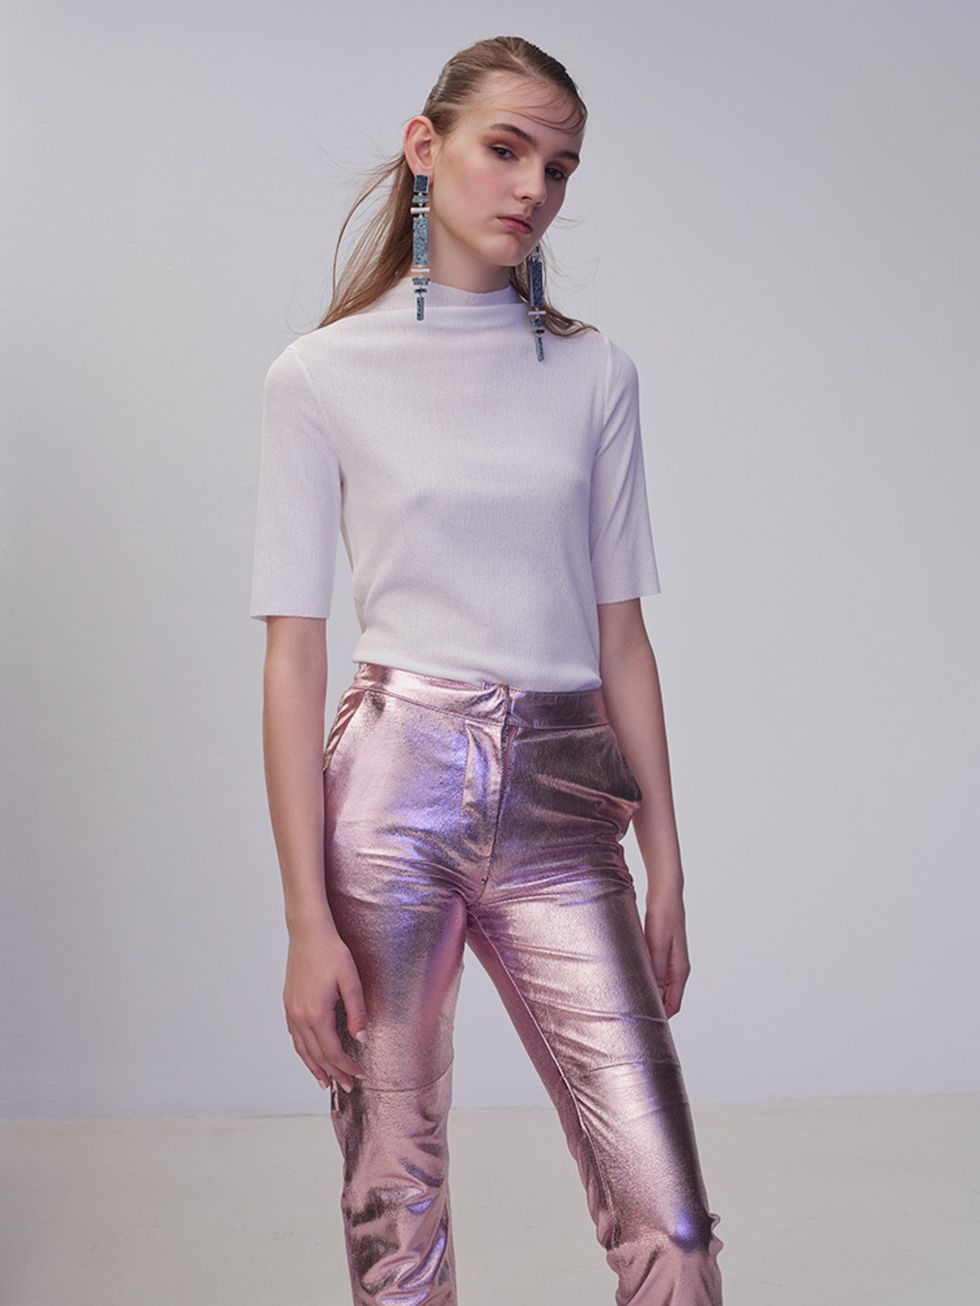 <p>Make metallic trousers work for daytime by pairing them with a simple white T-shirt and minimal make-up.</p>

<p><a href="http://www2.hm.com/en_gb/productpage.0355065001.html" target="_blank">Cotton top, £12.99, H&M</a>. Leather trousers, £345, Paul & 